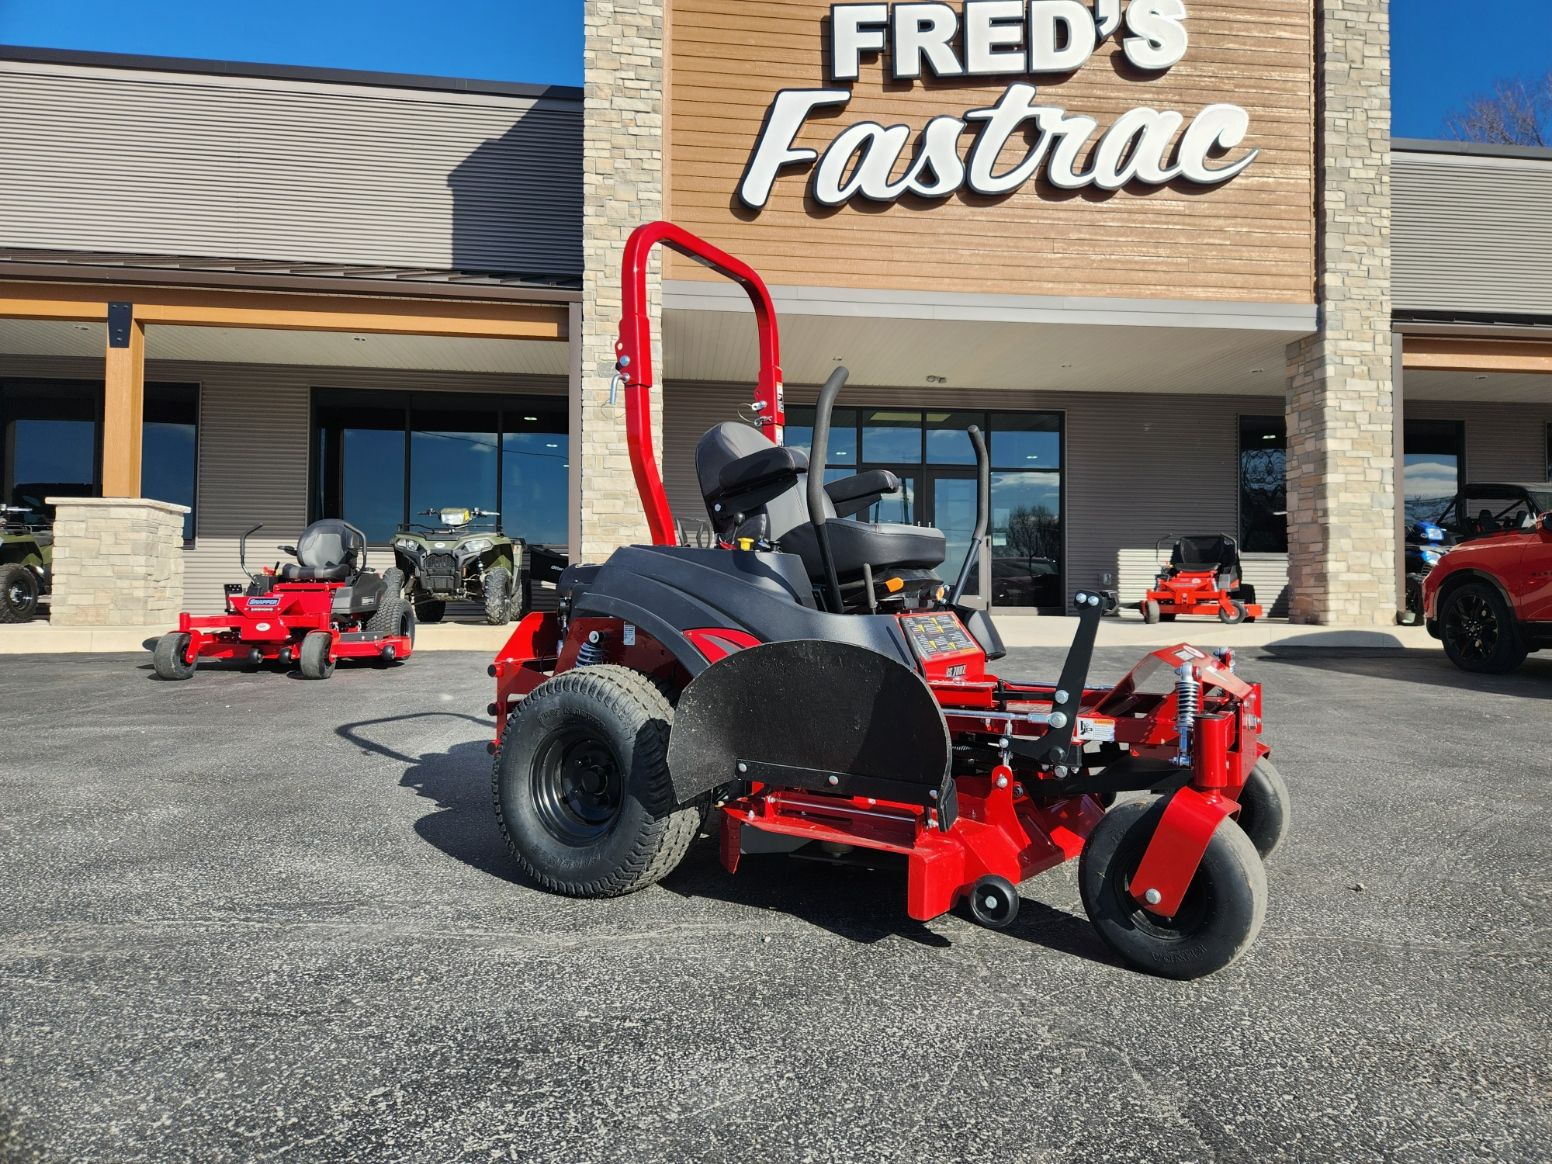 2022 Ferris Industries IS 700Z 61 in. Briggs & Stratton Commercial 27 hp in Fond Du Lac, Wisconsin - Photo 1